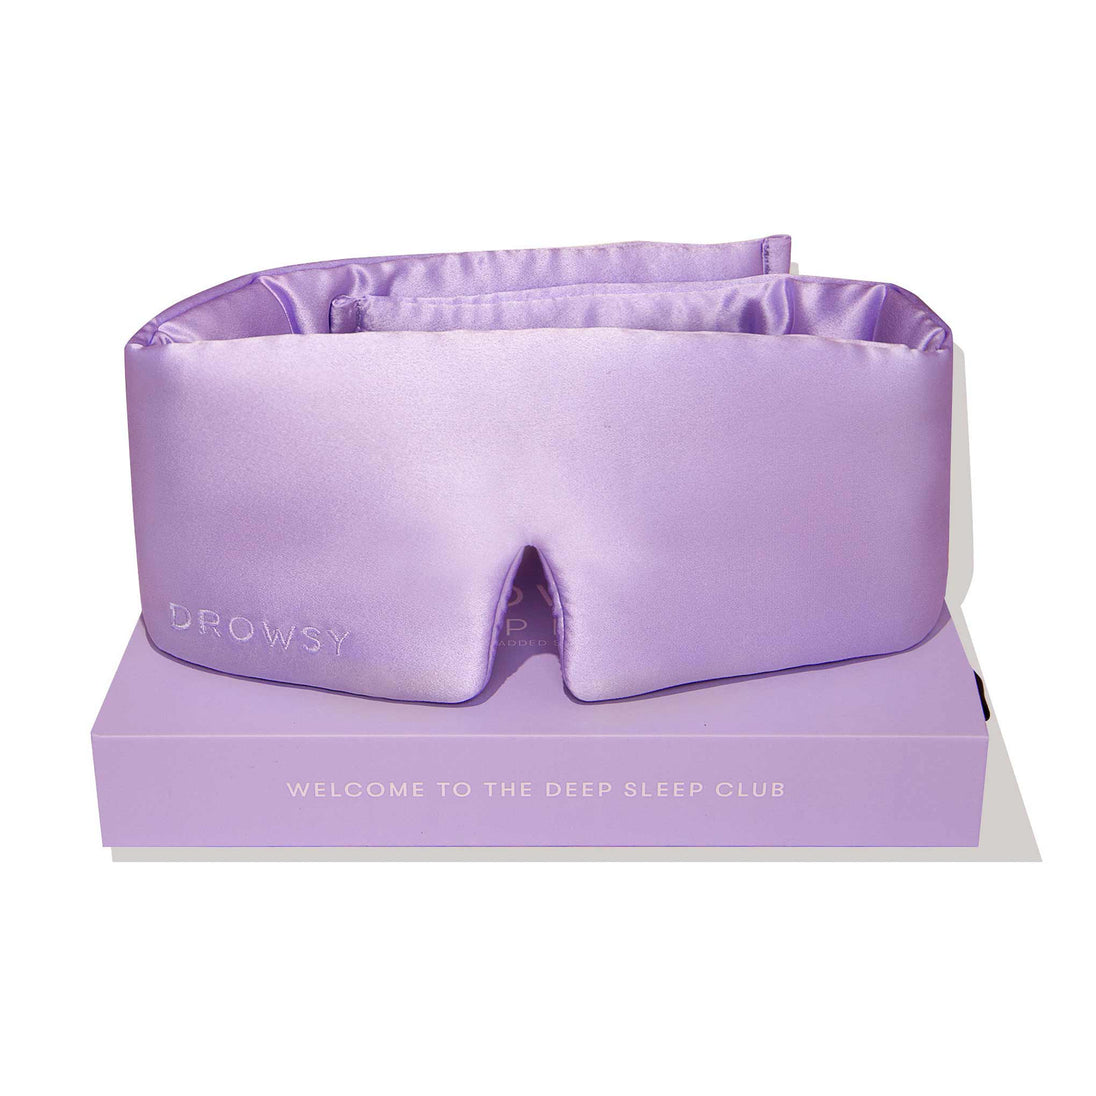 Lavender coloured Drowsy silk sleep mask on a white background